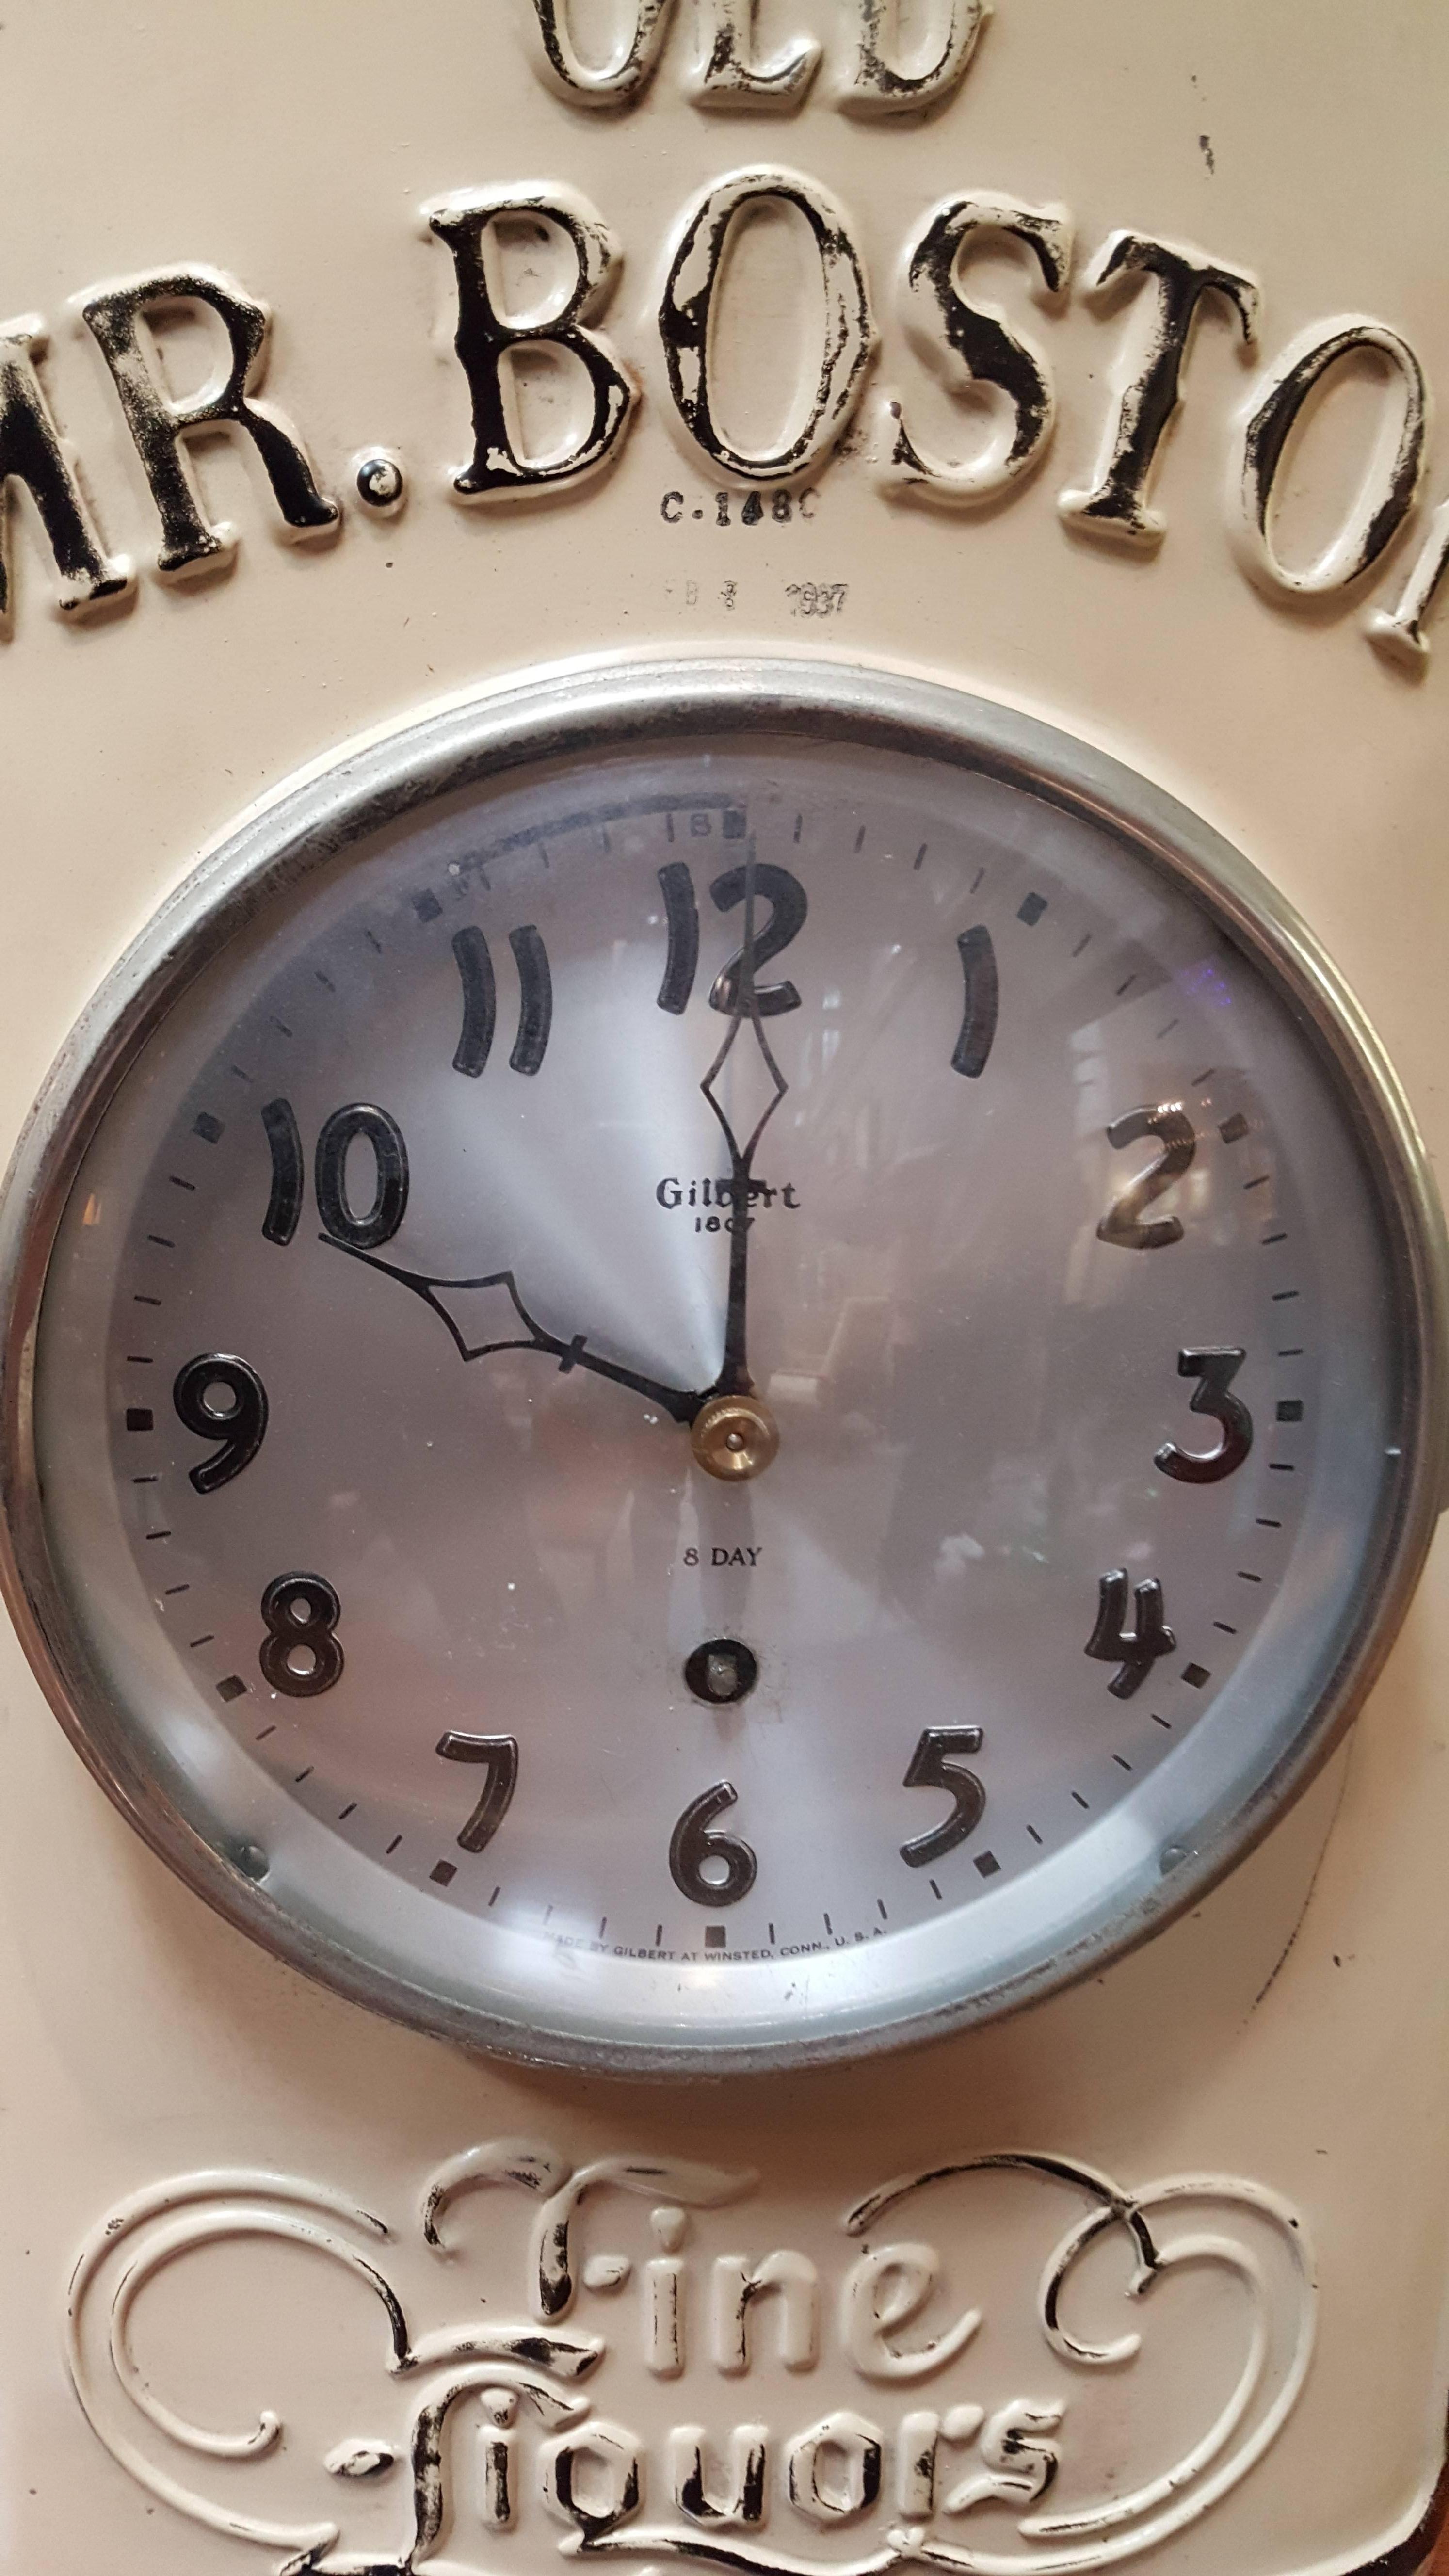 A 1930s store advertising clock for Old Mr. Boston liquors. Original painted metal finish, dated 1937. Gilbert key-wind clock intact but not in working order. Very nice original condition. Measures 21.5